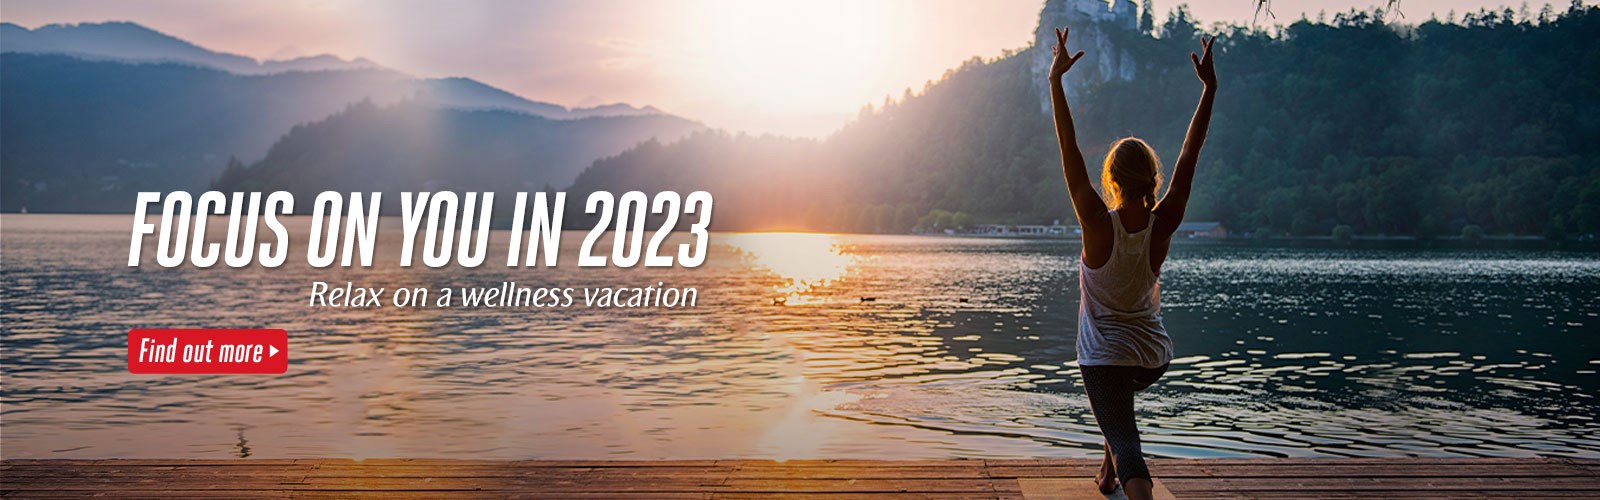 Emirates Vacations 2023 / 2024 l Emirates Vacations